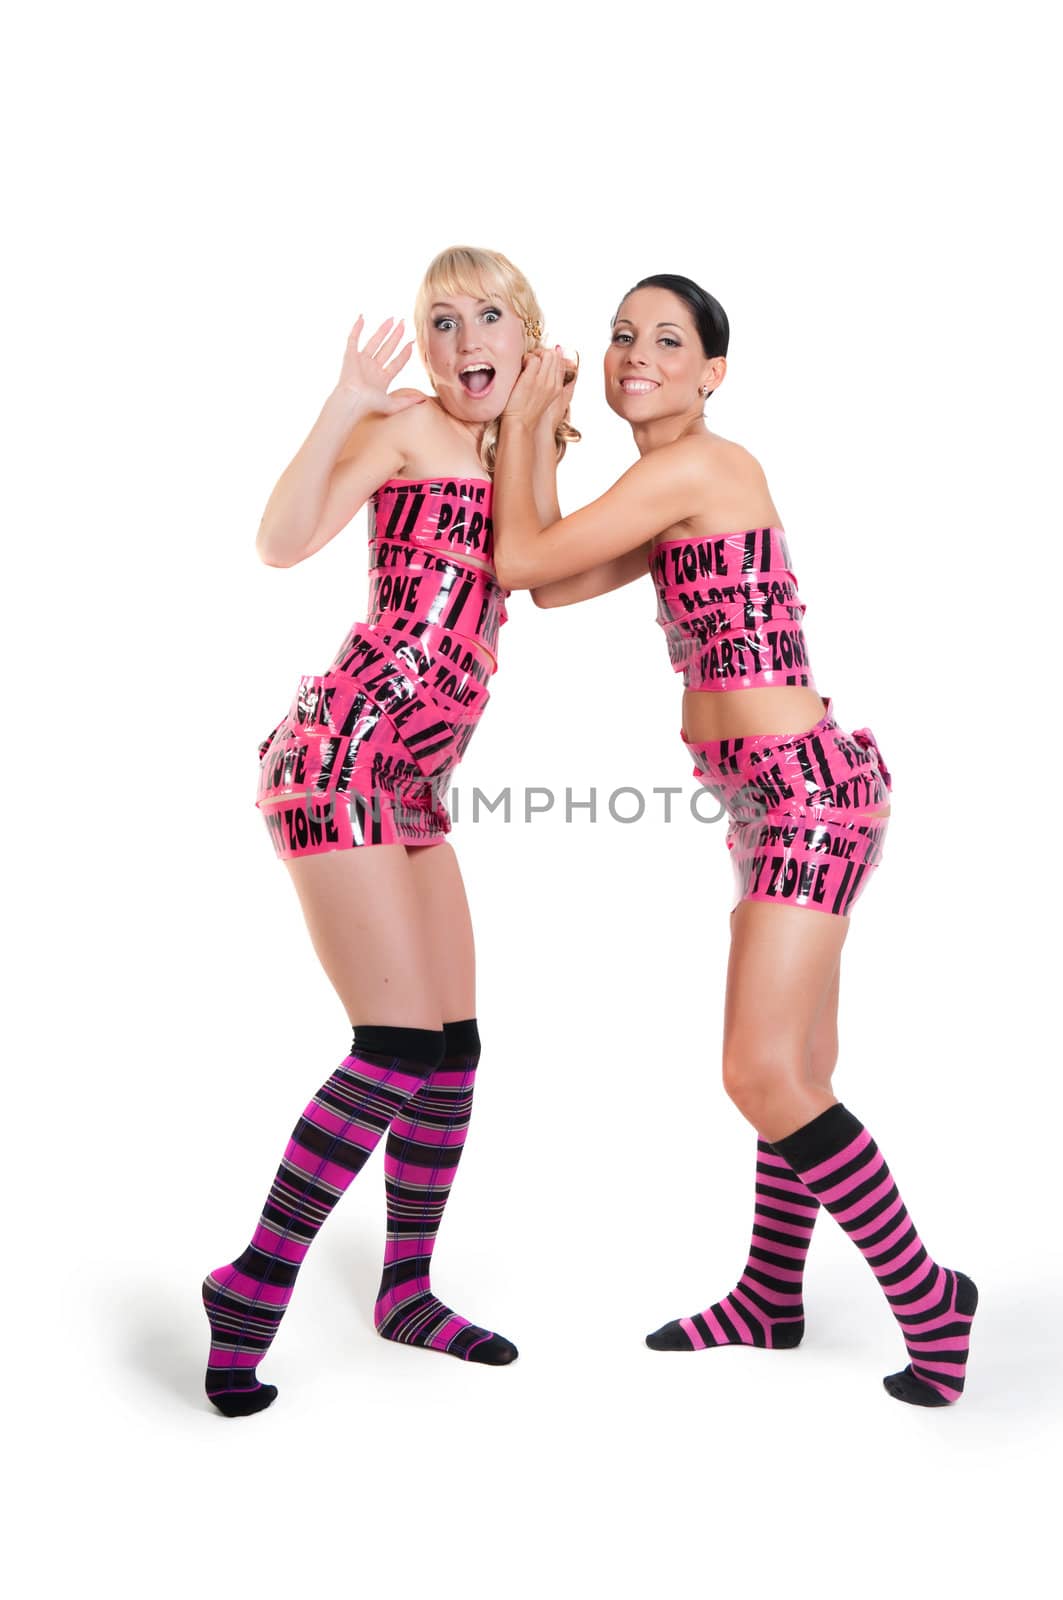 Girls in pink tape dress by anytka